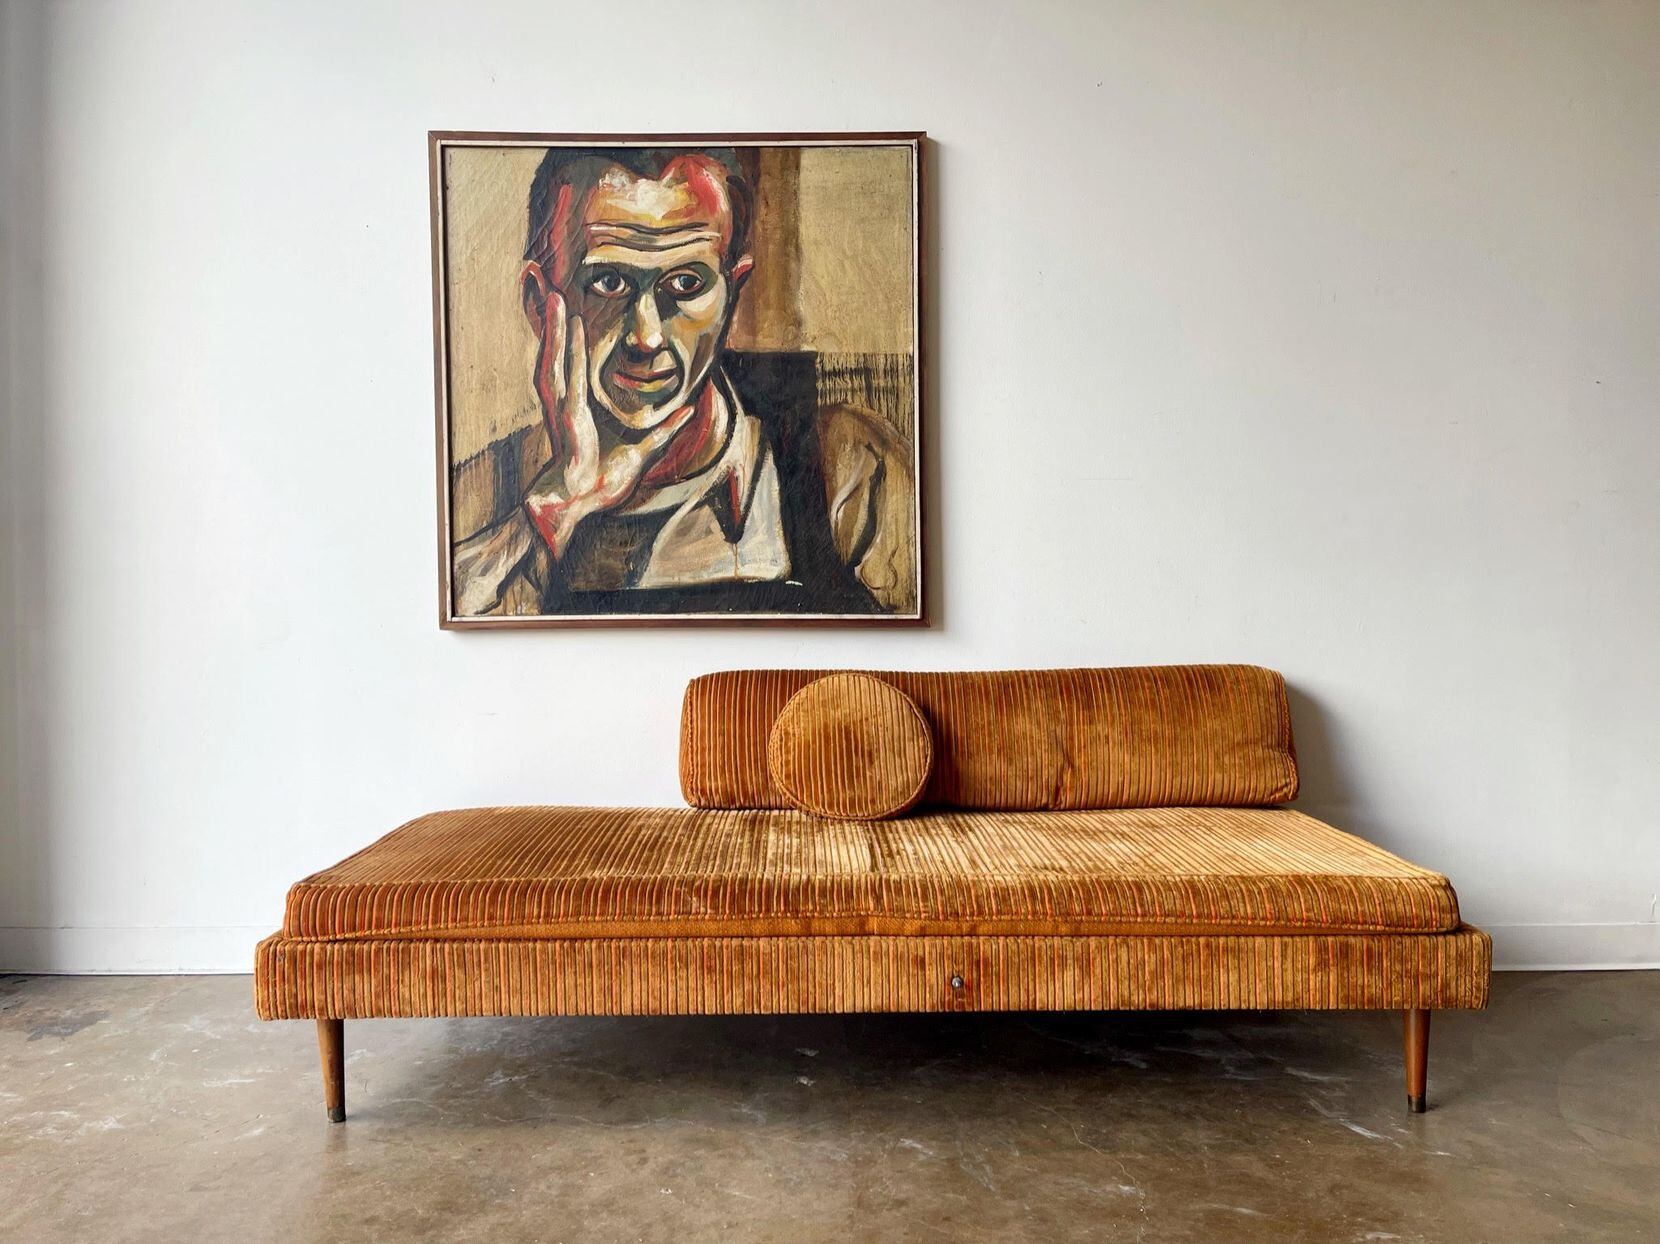 A painting hangs behind a chaise lounge couch.